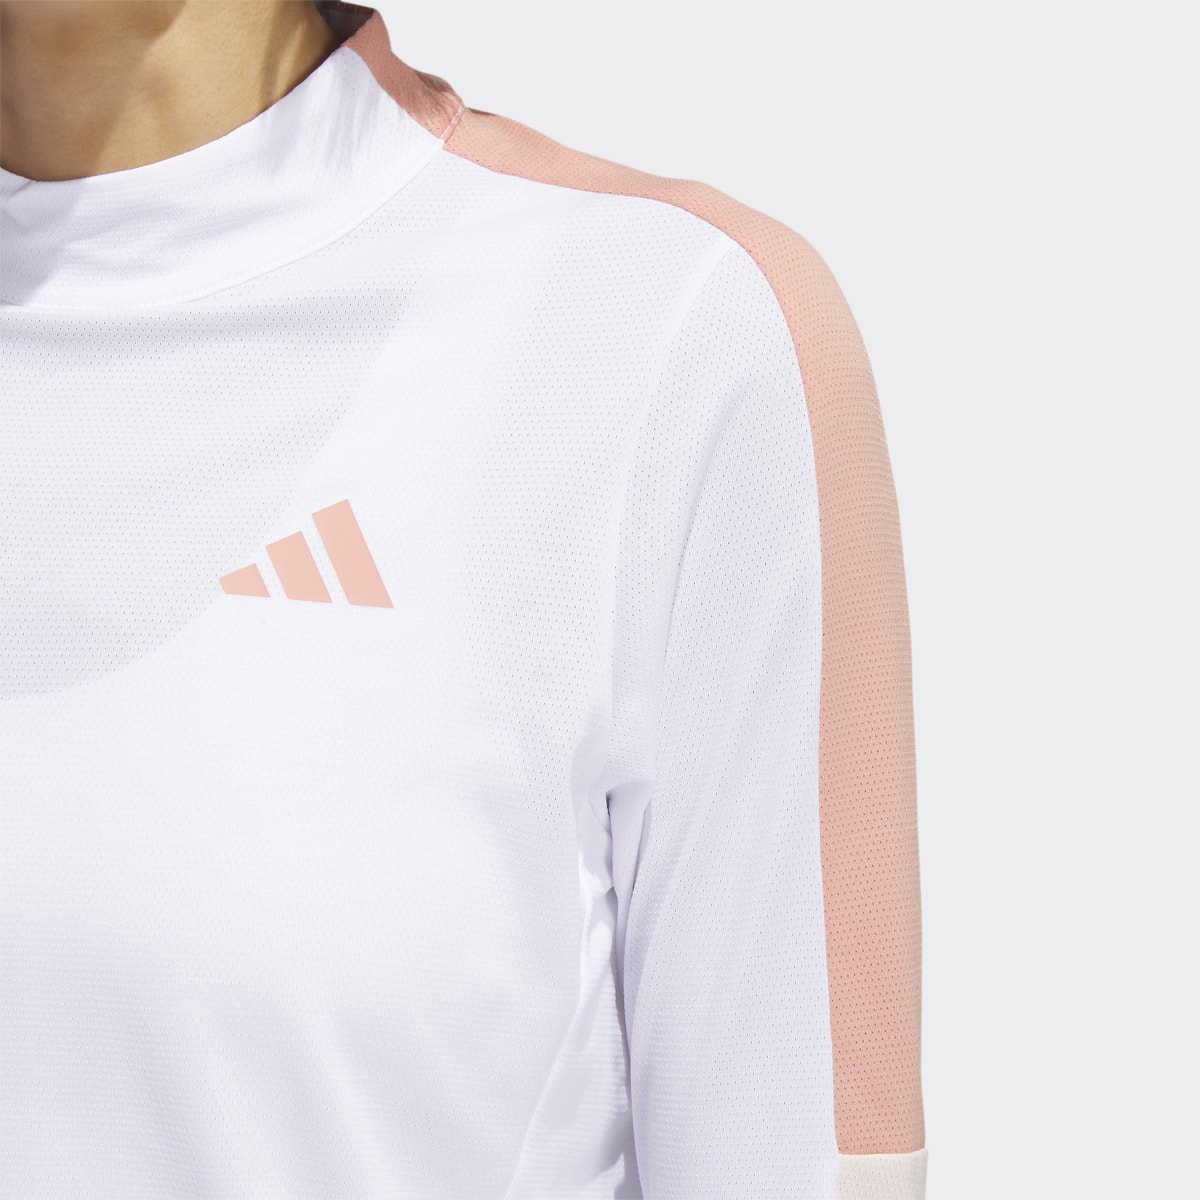 Adidas Made With Nature Mock Neck Tee. 7